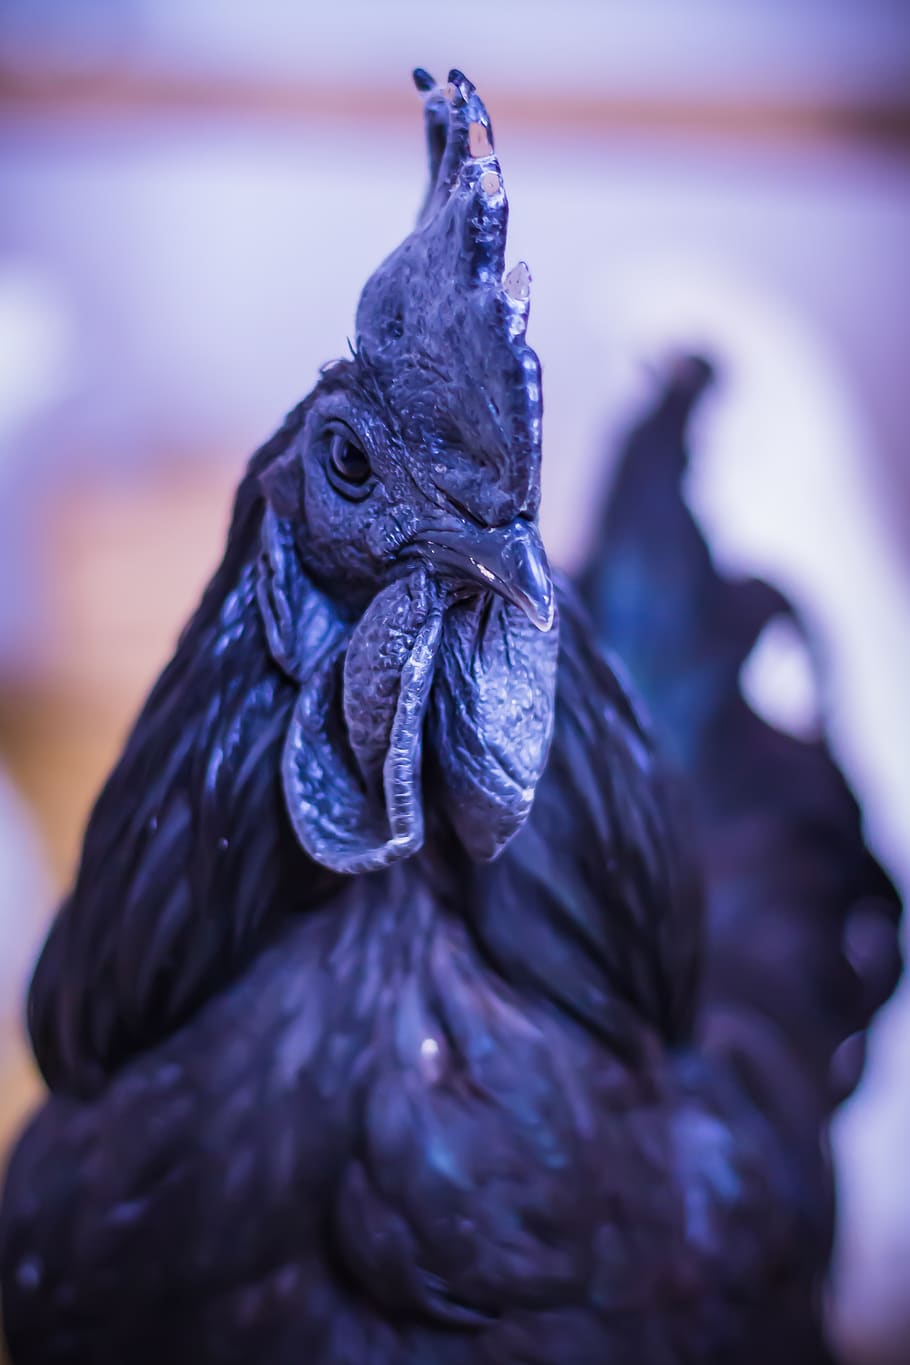 ayam cemani, hahn, chicken, black chicken, poultry, animal, birds, pets, animal themes, close-up